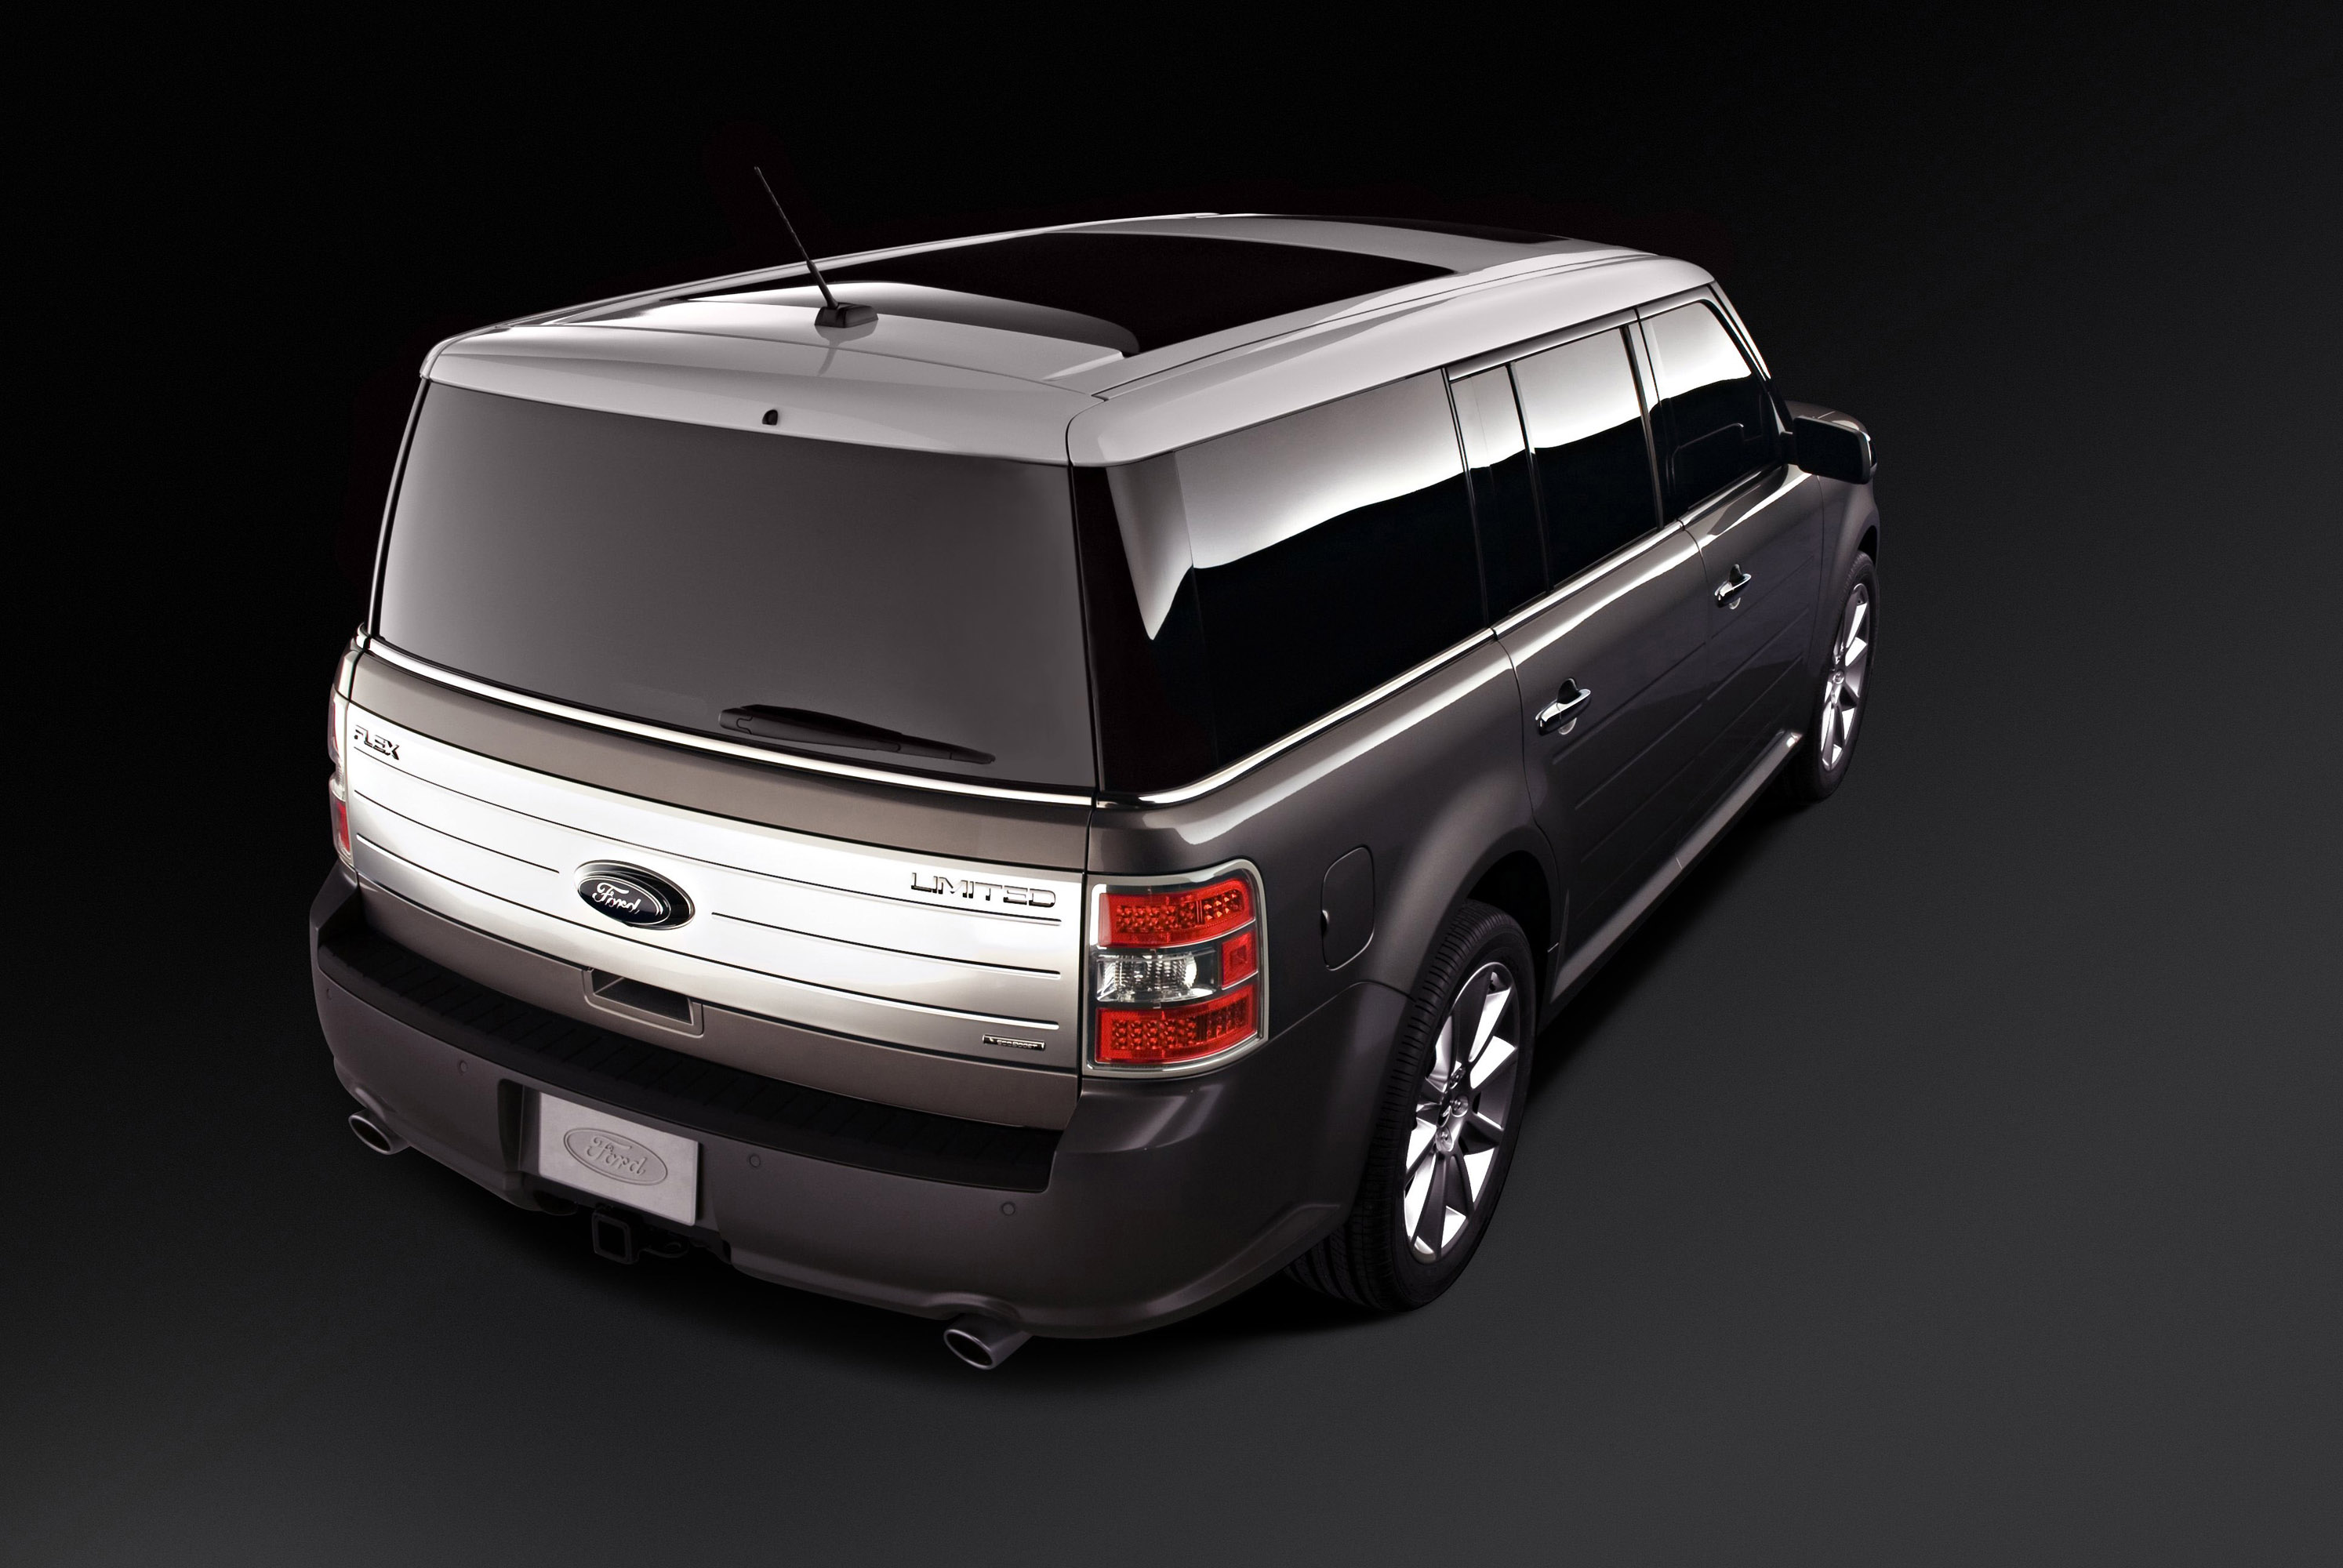 Ford Flex with EcoBoost